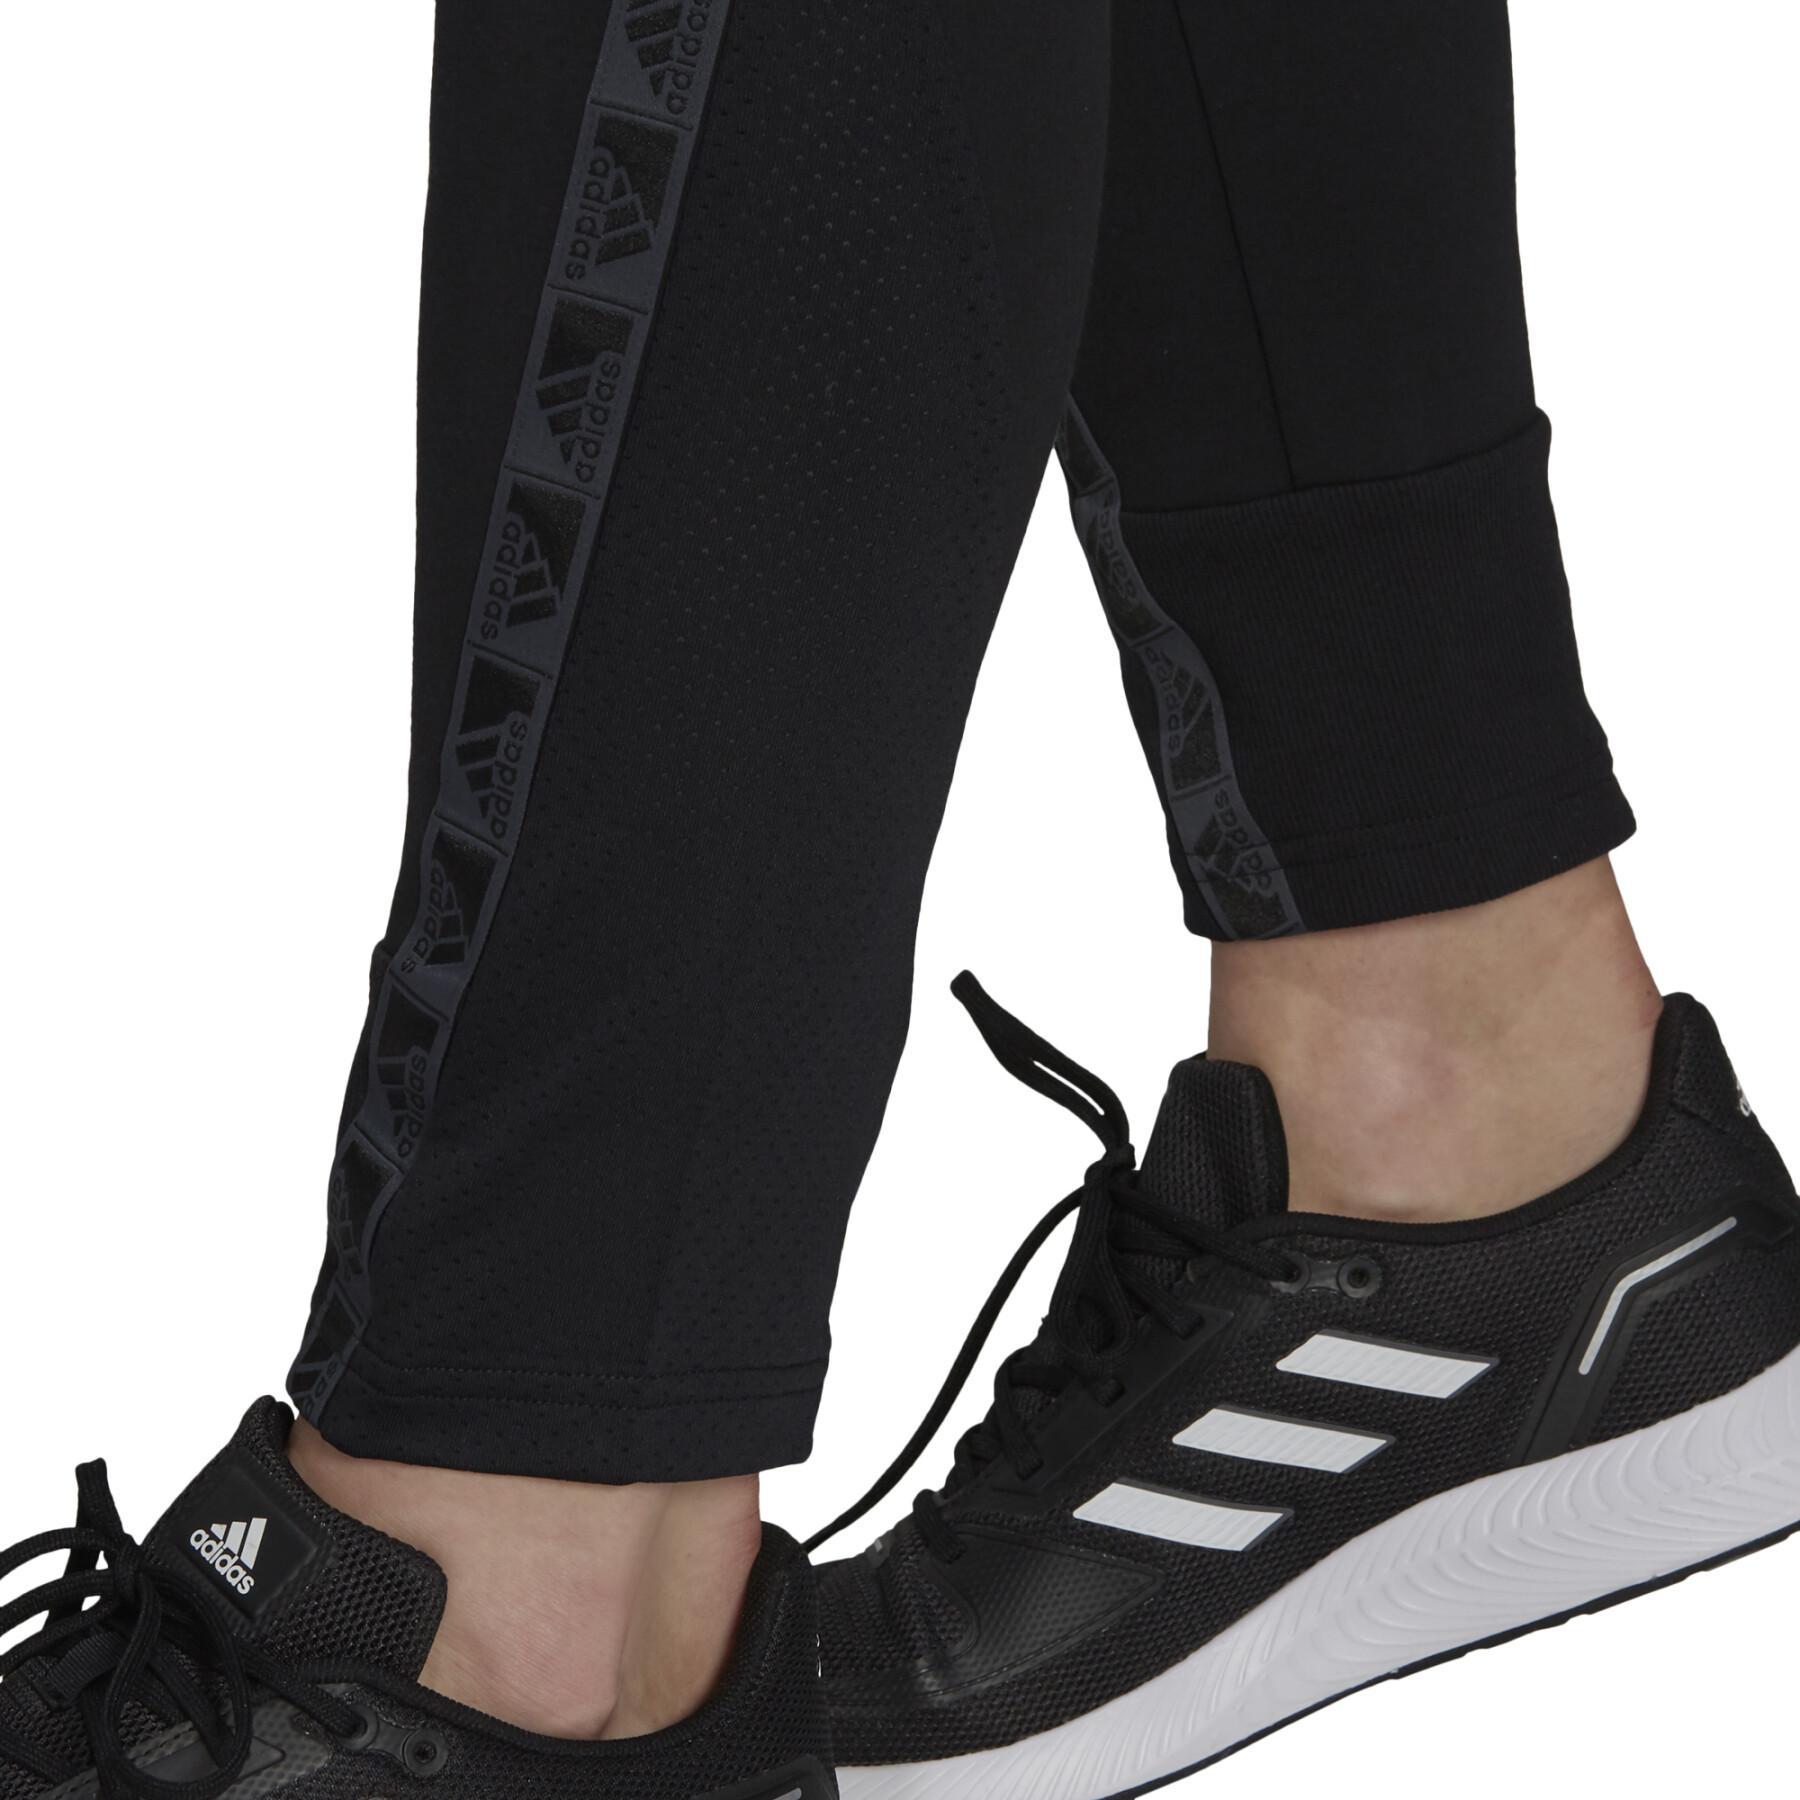 Women's trousers adidas Designed 2 Move Coton Touch